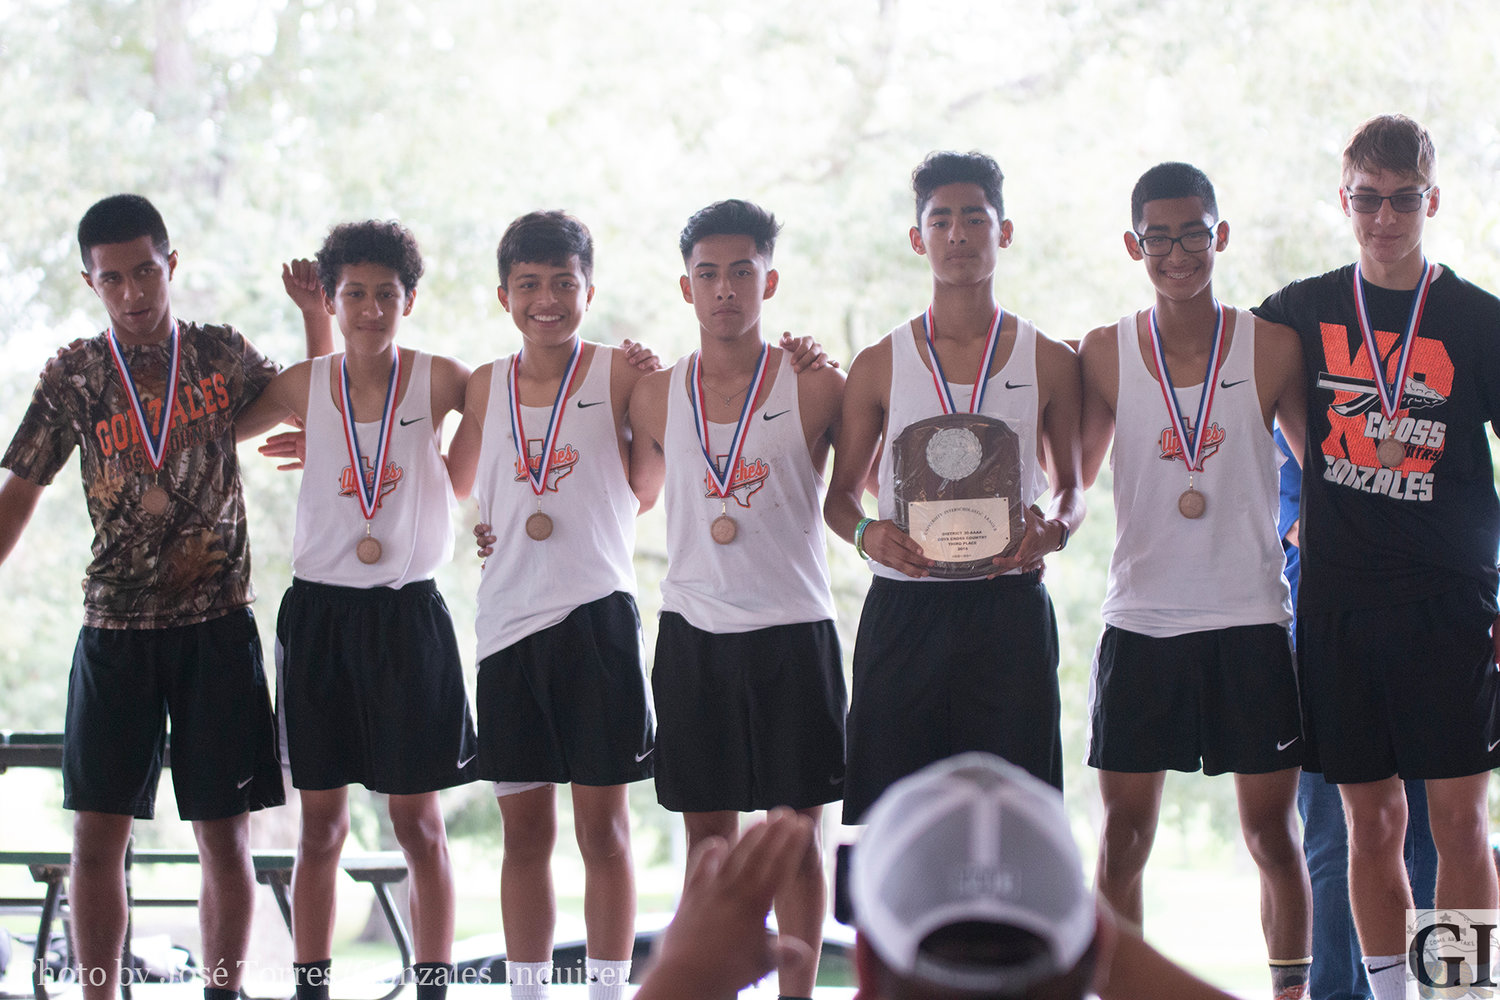 The Gonzales team of Avram Almaguer, Avery Almaguer, Antonio Hernandez, Daniel Garcia, Ruben Ortiz, Carlos Mendoza and Mark Burek will be headed to the Region IV-4A meet in Corpus Christi after placing third in the District 30-4A meet.